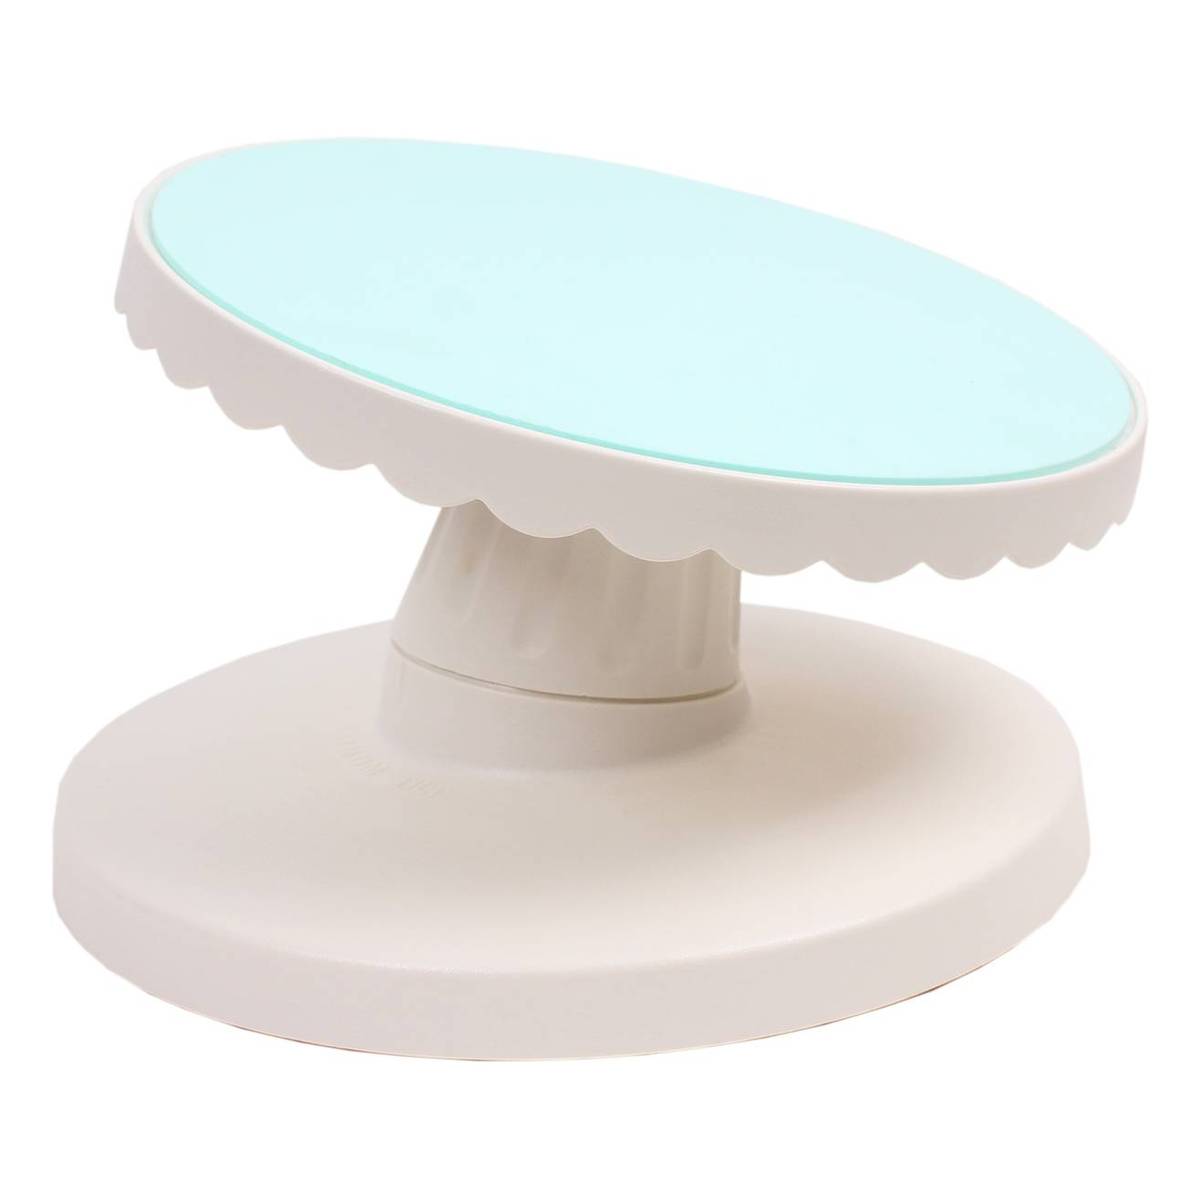 Celebrate It Turntable Cake Stand - Each